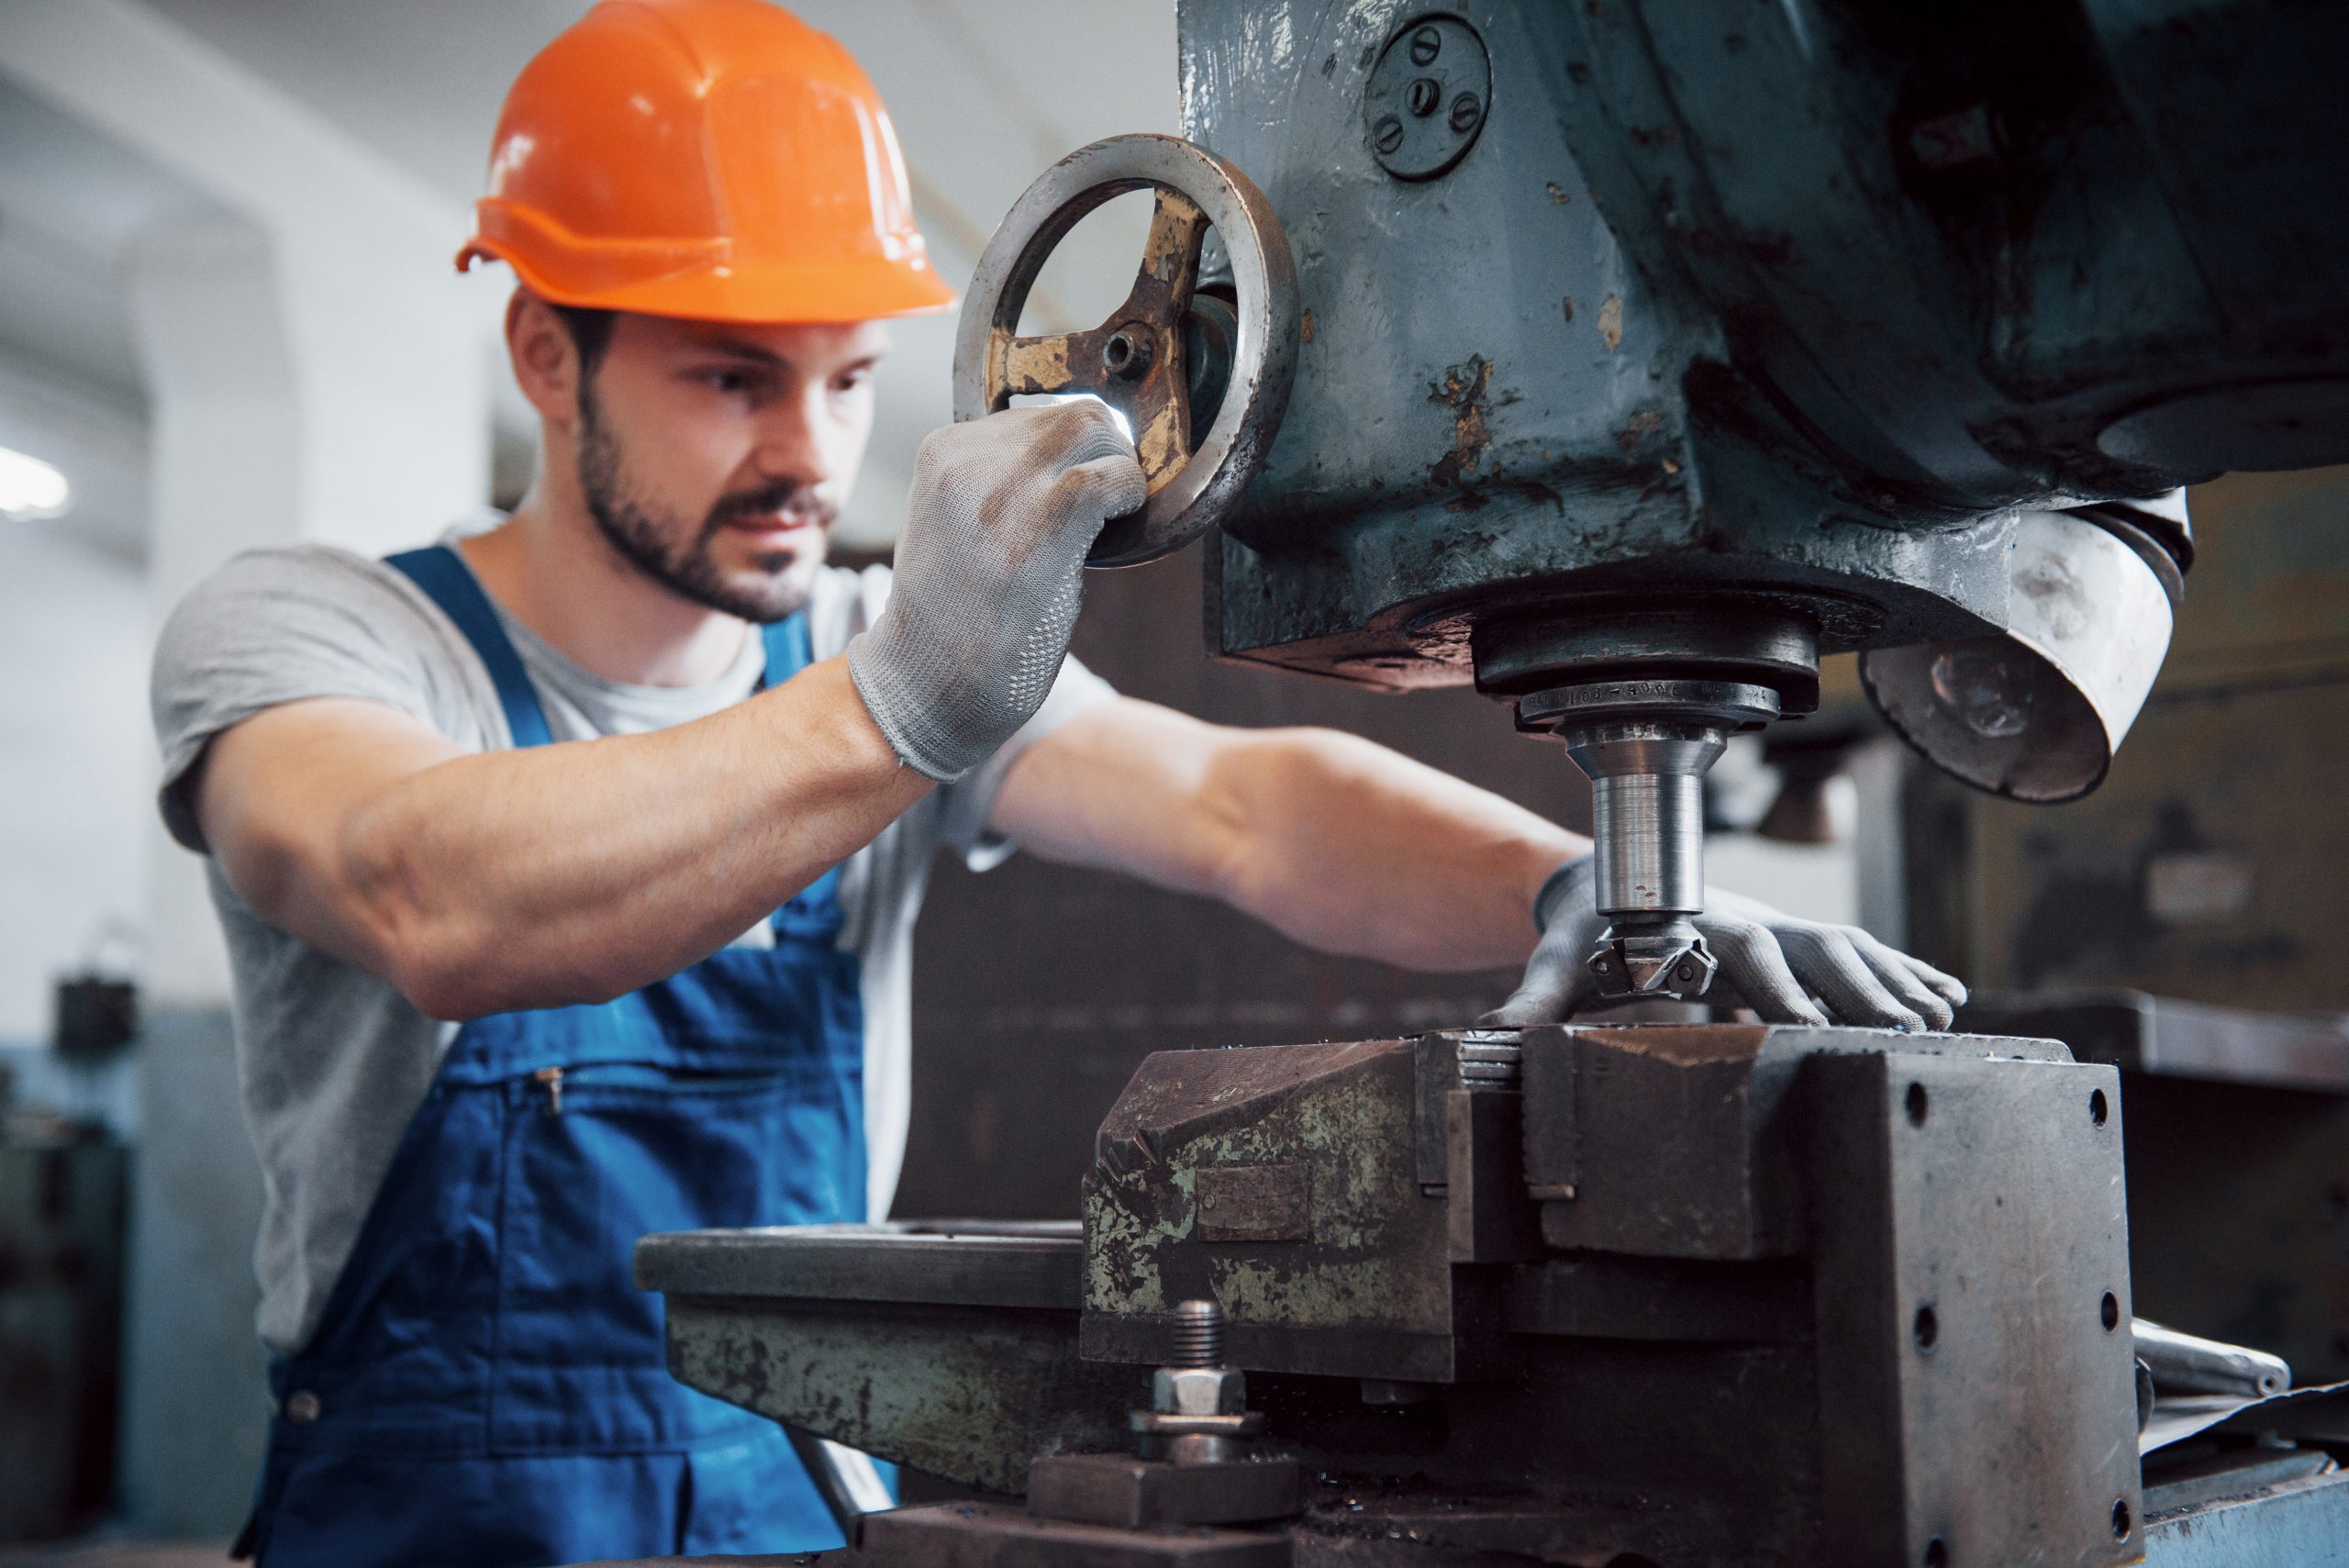 portrait-of-a-young-worker-in-a-hard-hat-at-a-large-metalworking-plant-the-engineer-serves-the-machines-and-manufactures-parts-for-gas-equipment